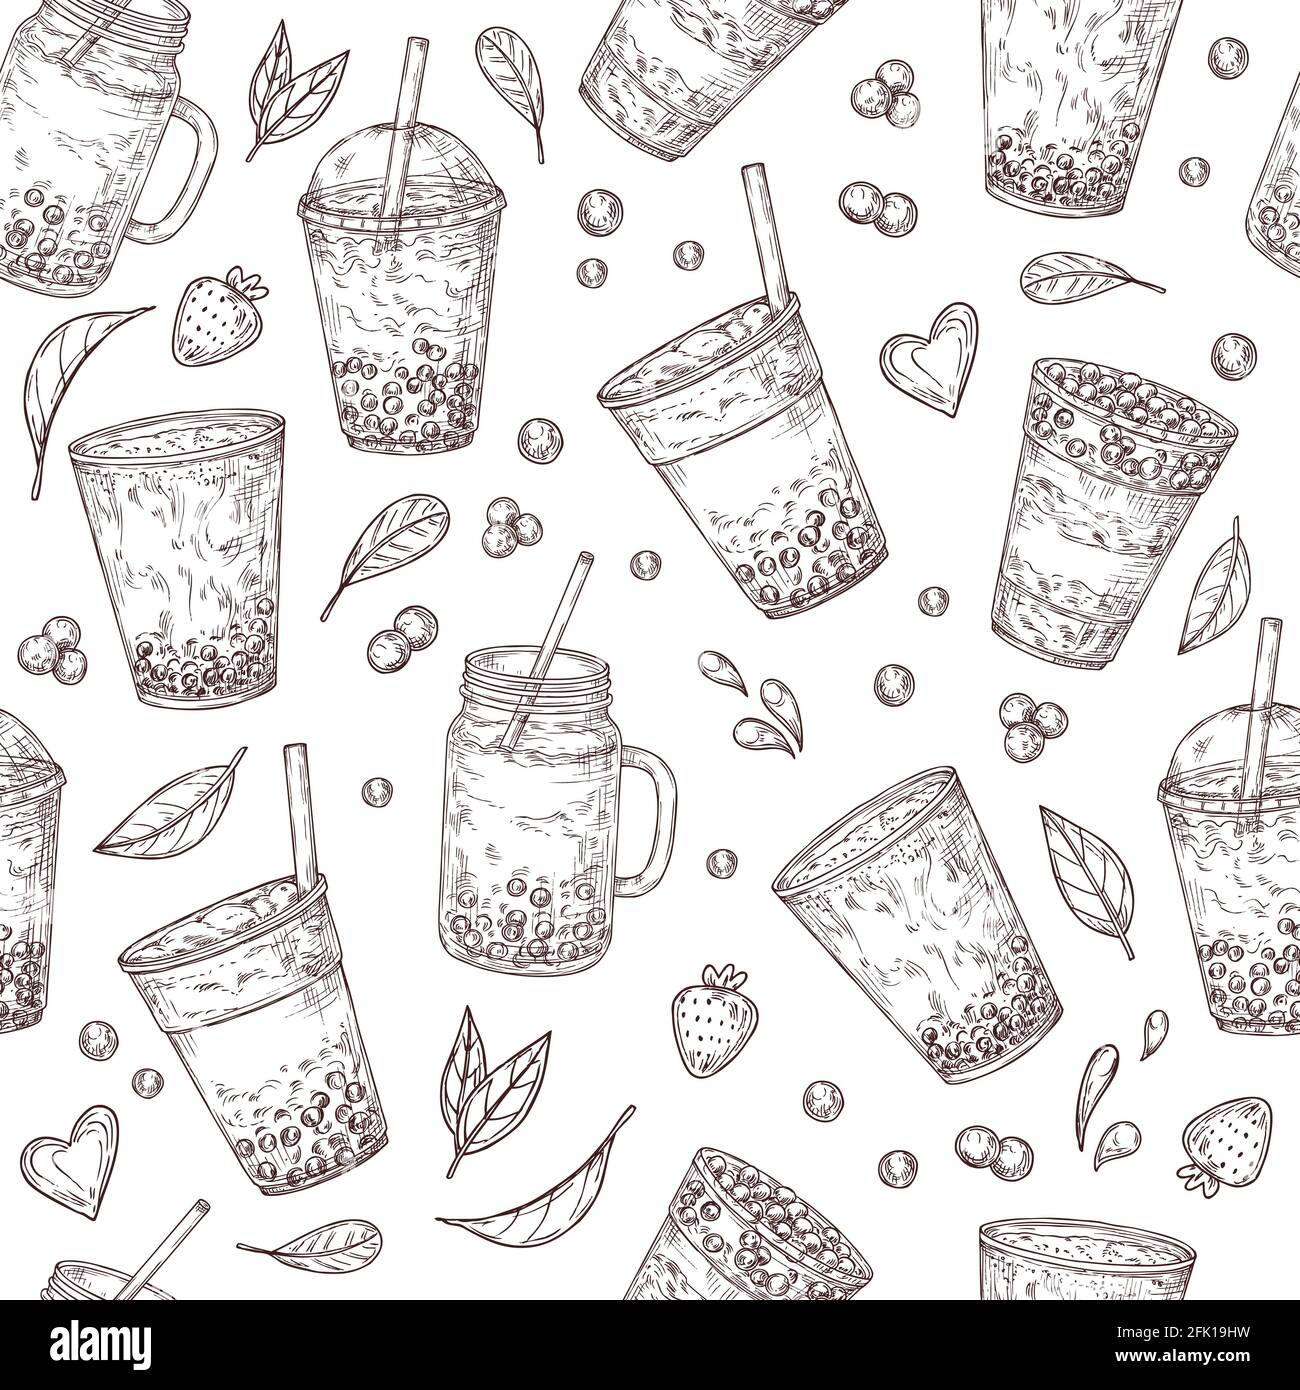 https://c8.alamy.com/comp/2FK19HW/boba-tea-pattern-asian-drinks-background-bubble-milk-shake-fresh-cold-juices-with-pearls-sweet-taiwan-breakfast-vector-seamless-texture-2FK19HW.jpg